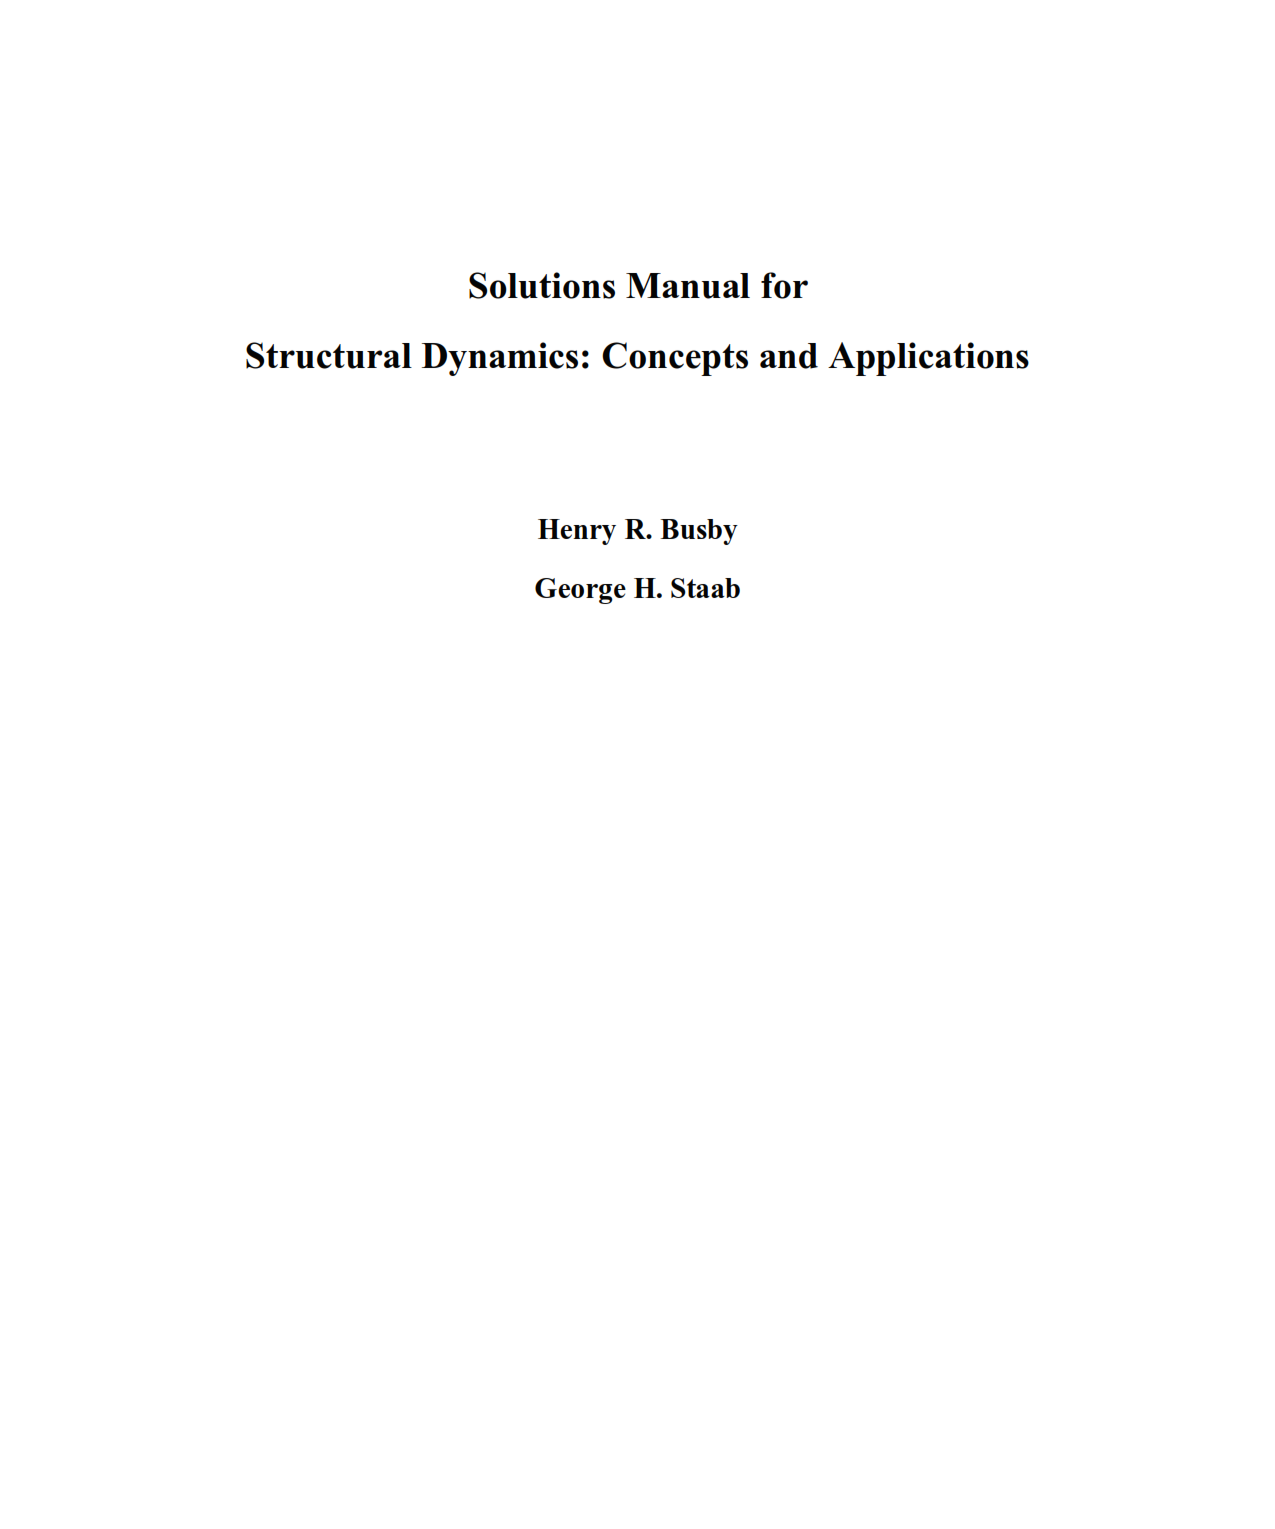 Download free Structural dynamics concepts and applications Henry Busby & George Staab 1st edition Solution manual pdf | gioumeh solutions